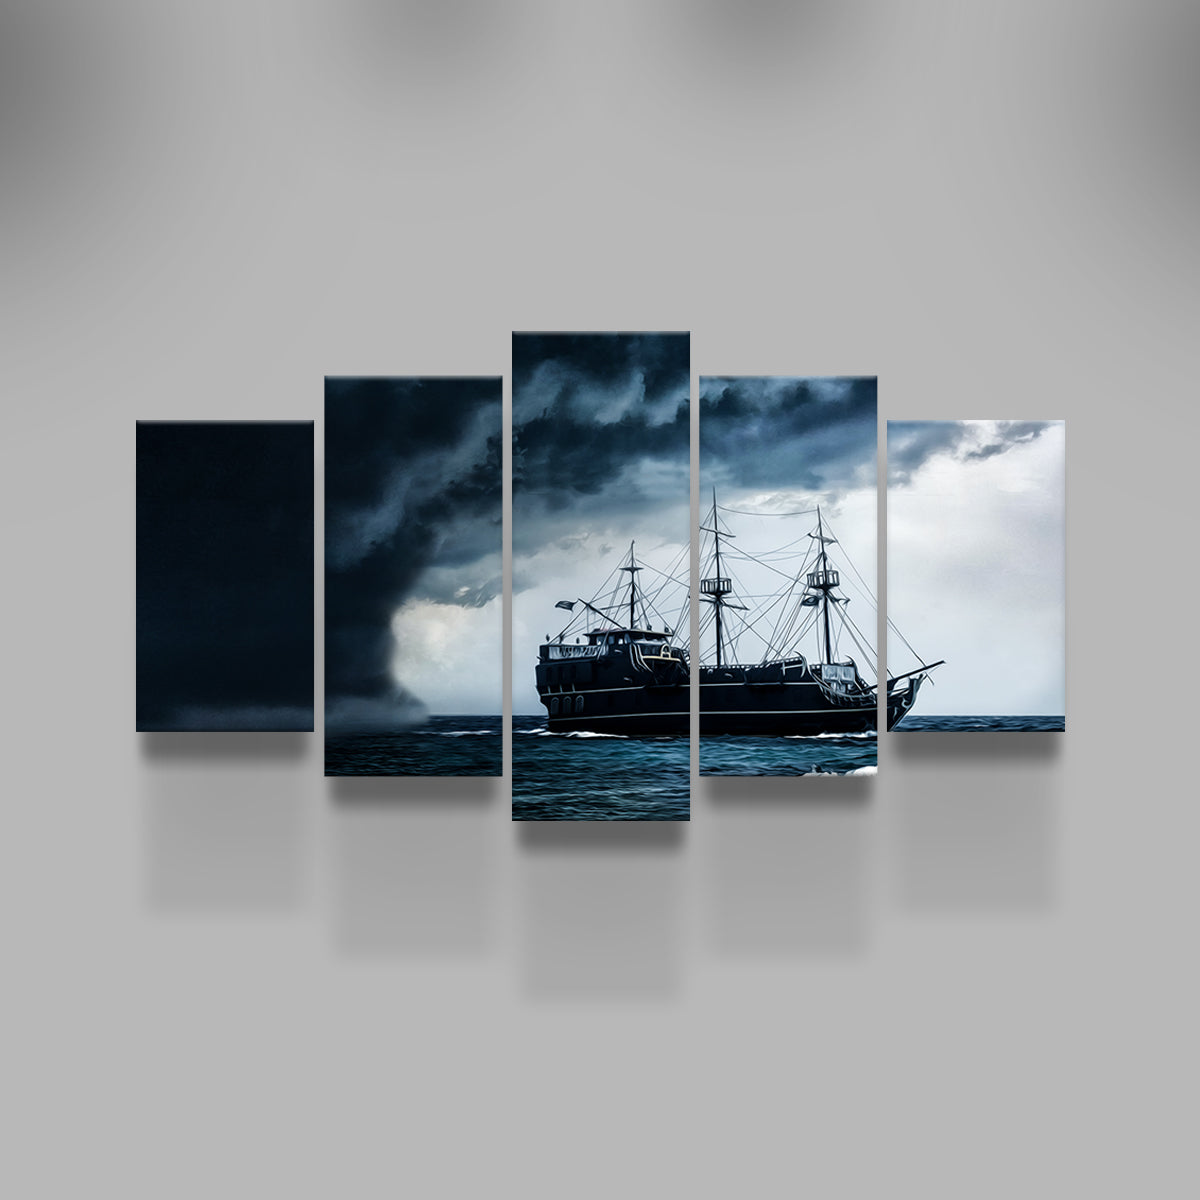 Pirate Ship in the Storm